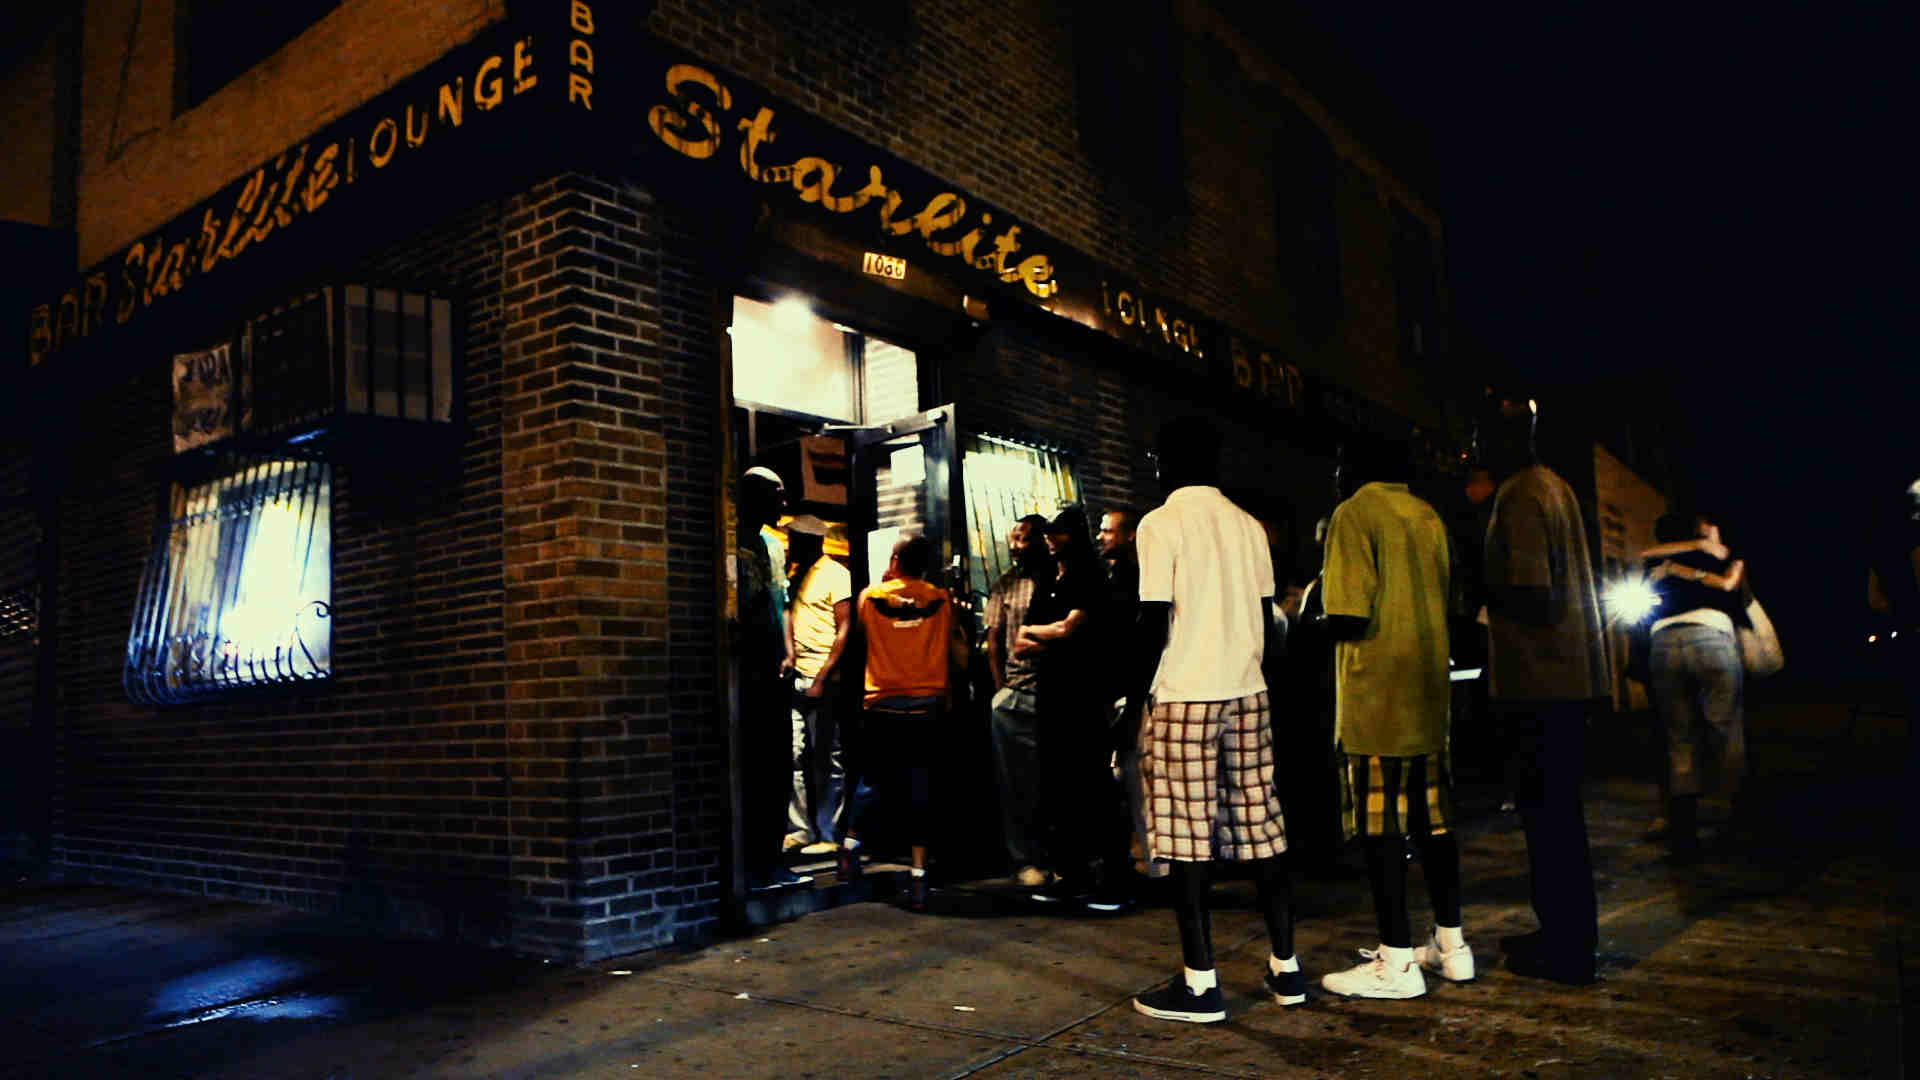 Night time exterior of bar with people lining up on sidewalk to enter.